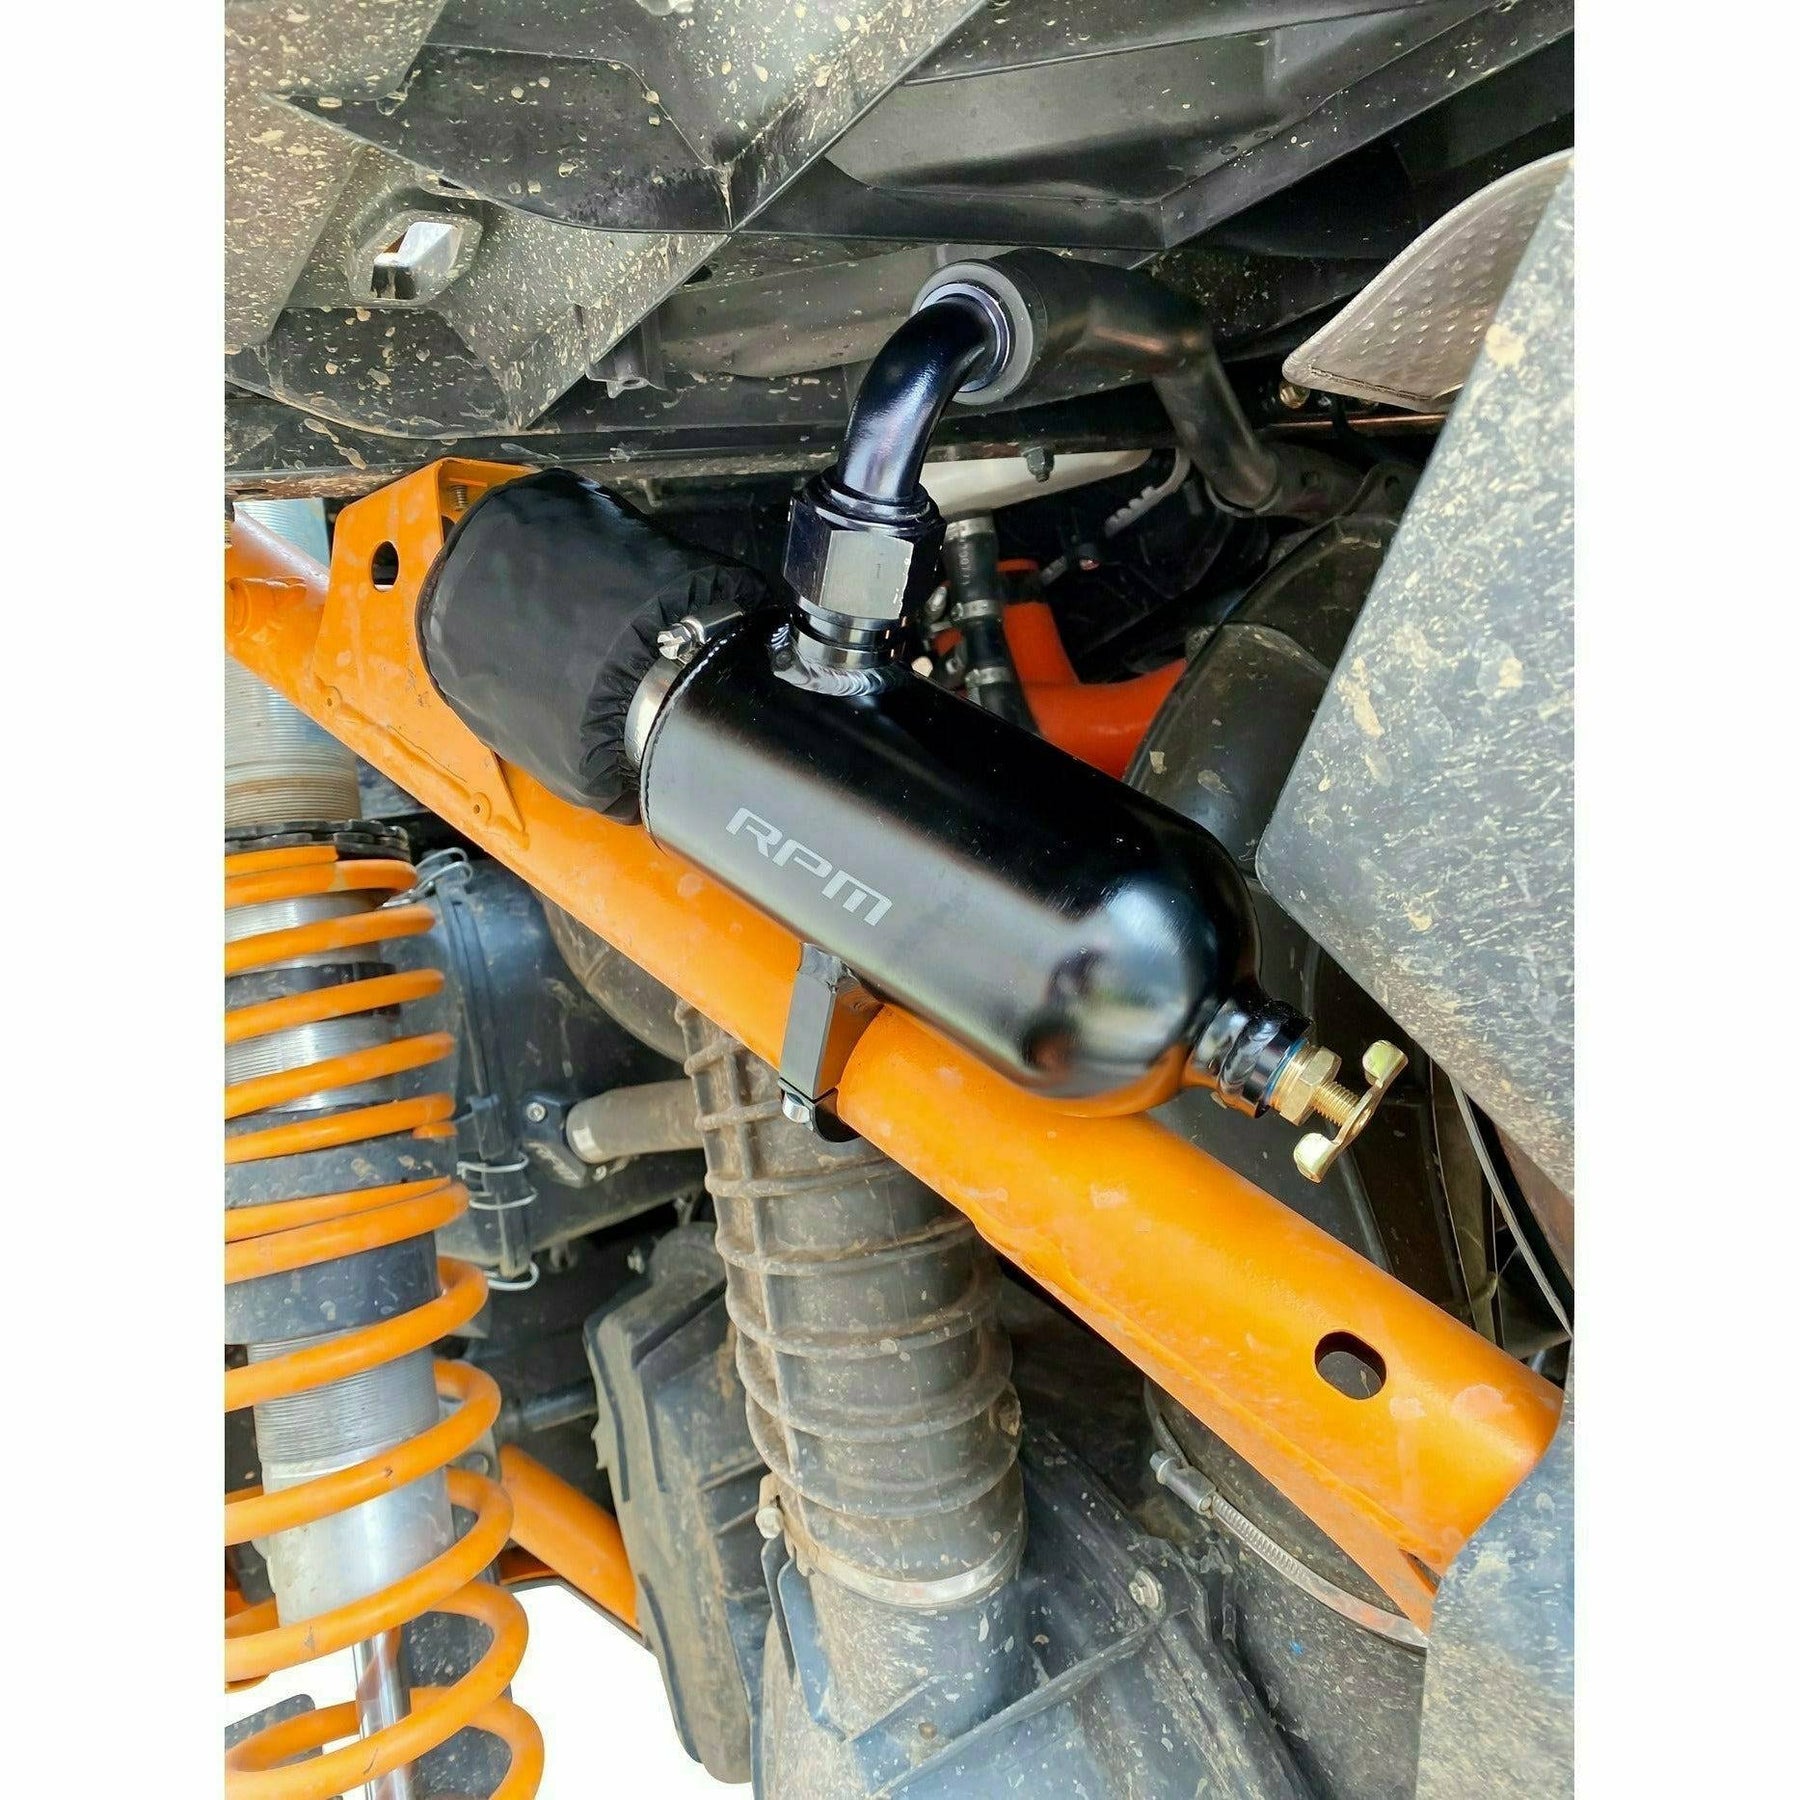 2017-2023 CAN-AM X3 OIL CATCH CAN / BREATHER SYSTEM